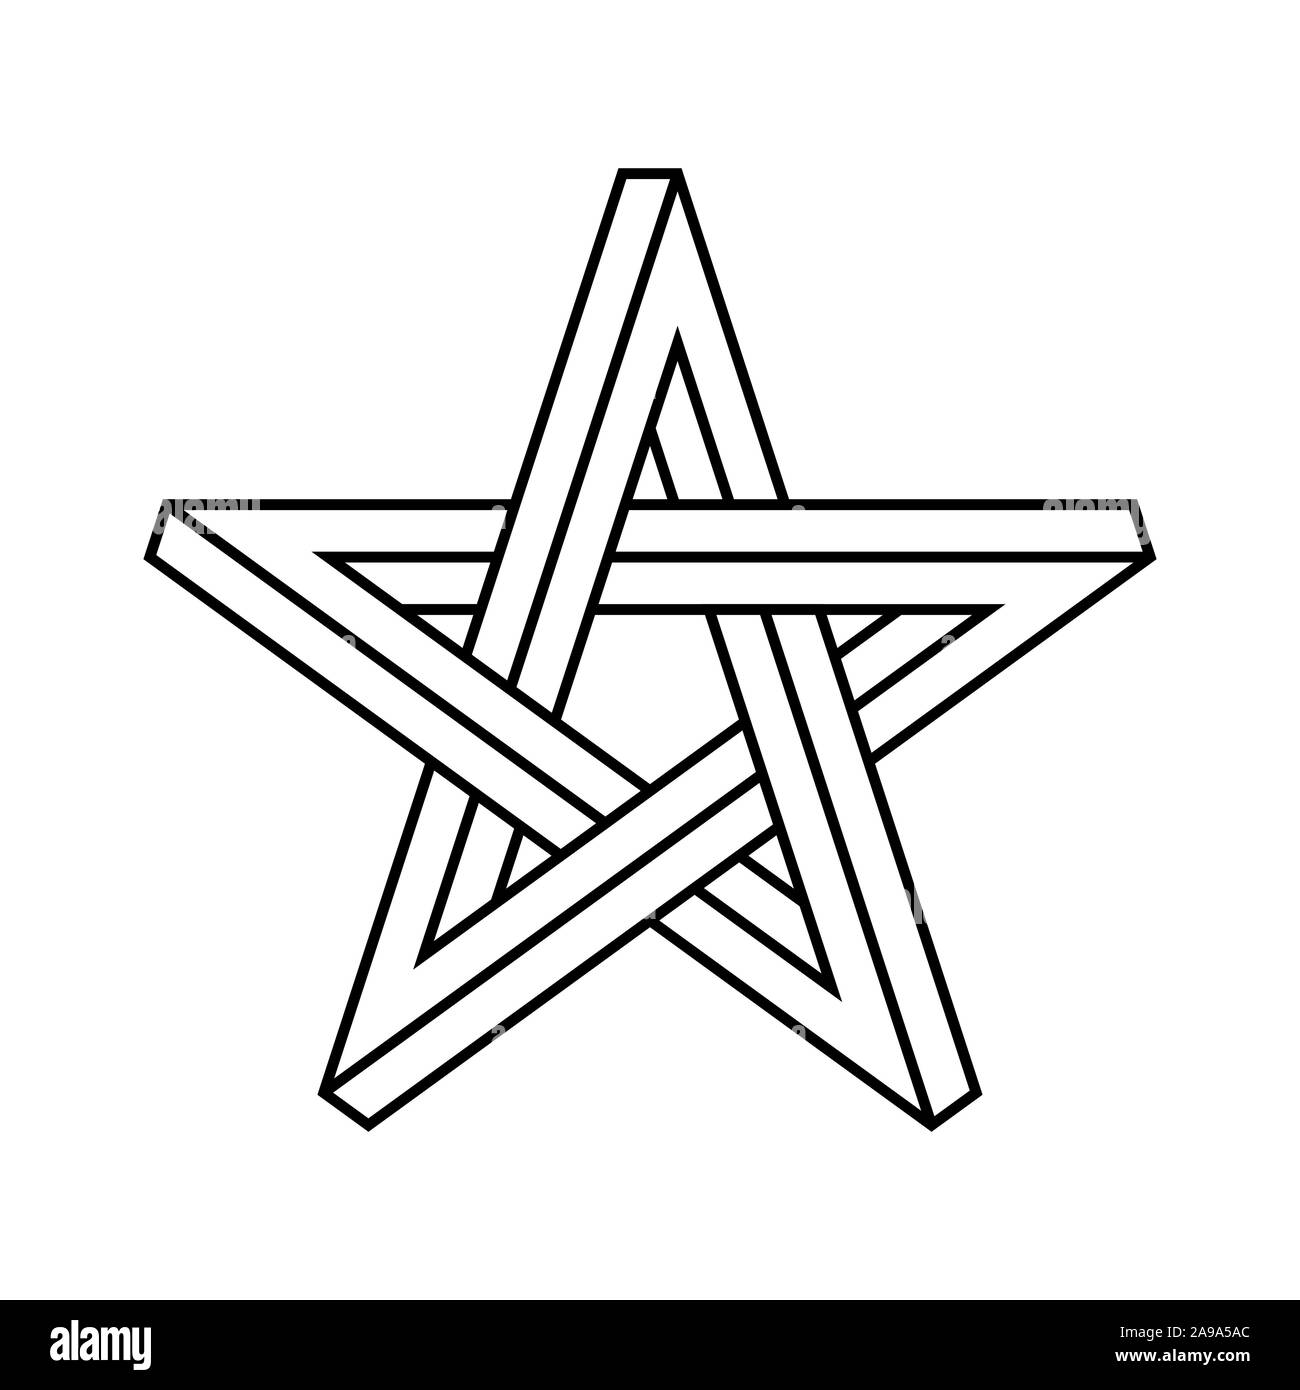 Impossible star outline. Impossible shape pentagram on white background. Five pointed star sign. Abstract symbol. Optical illusion geometric shape. Stock Vector